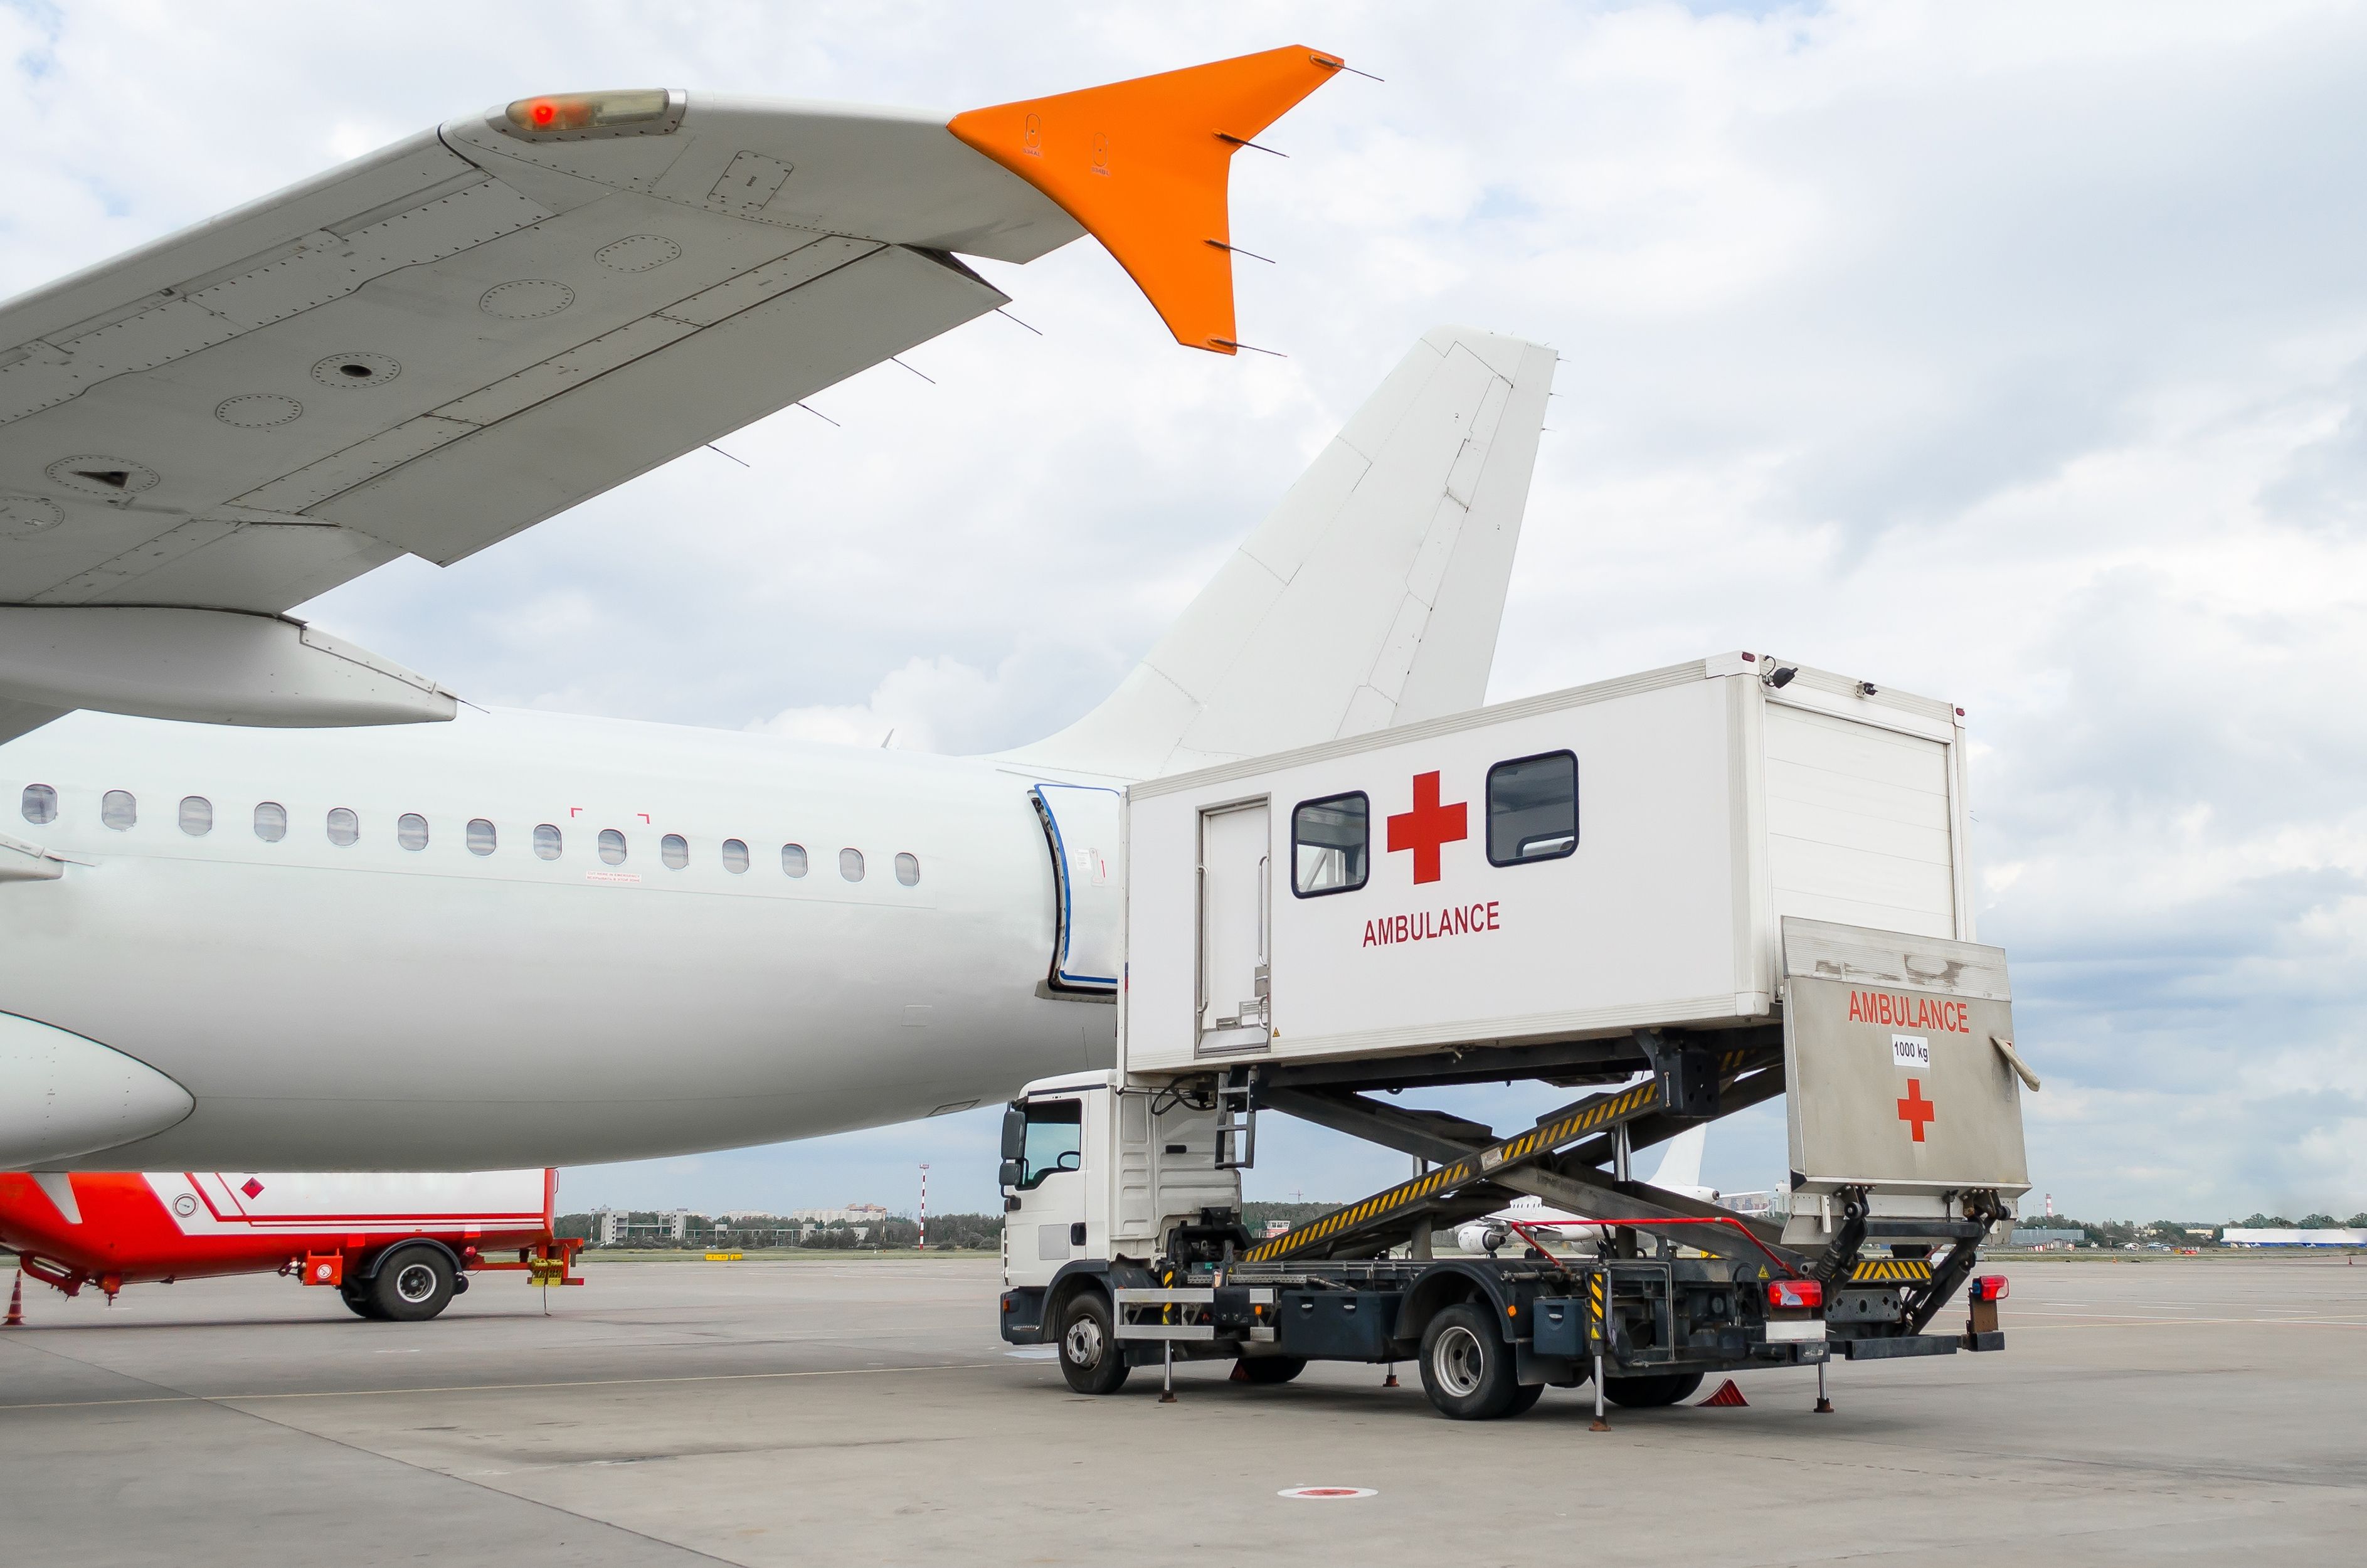 An ambulance in front of an aircraft 